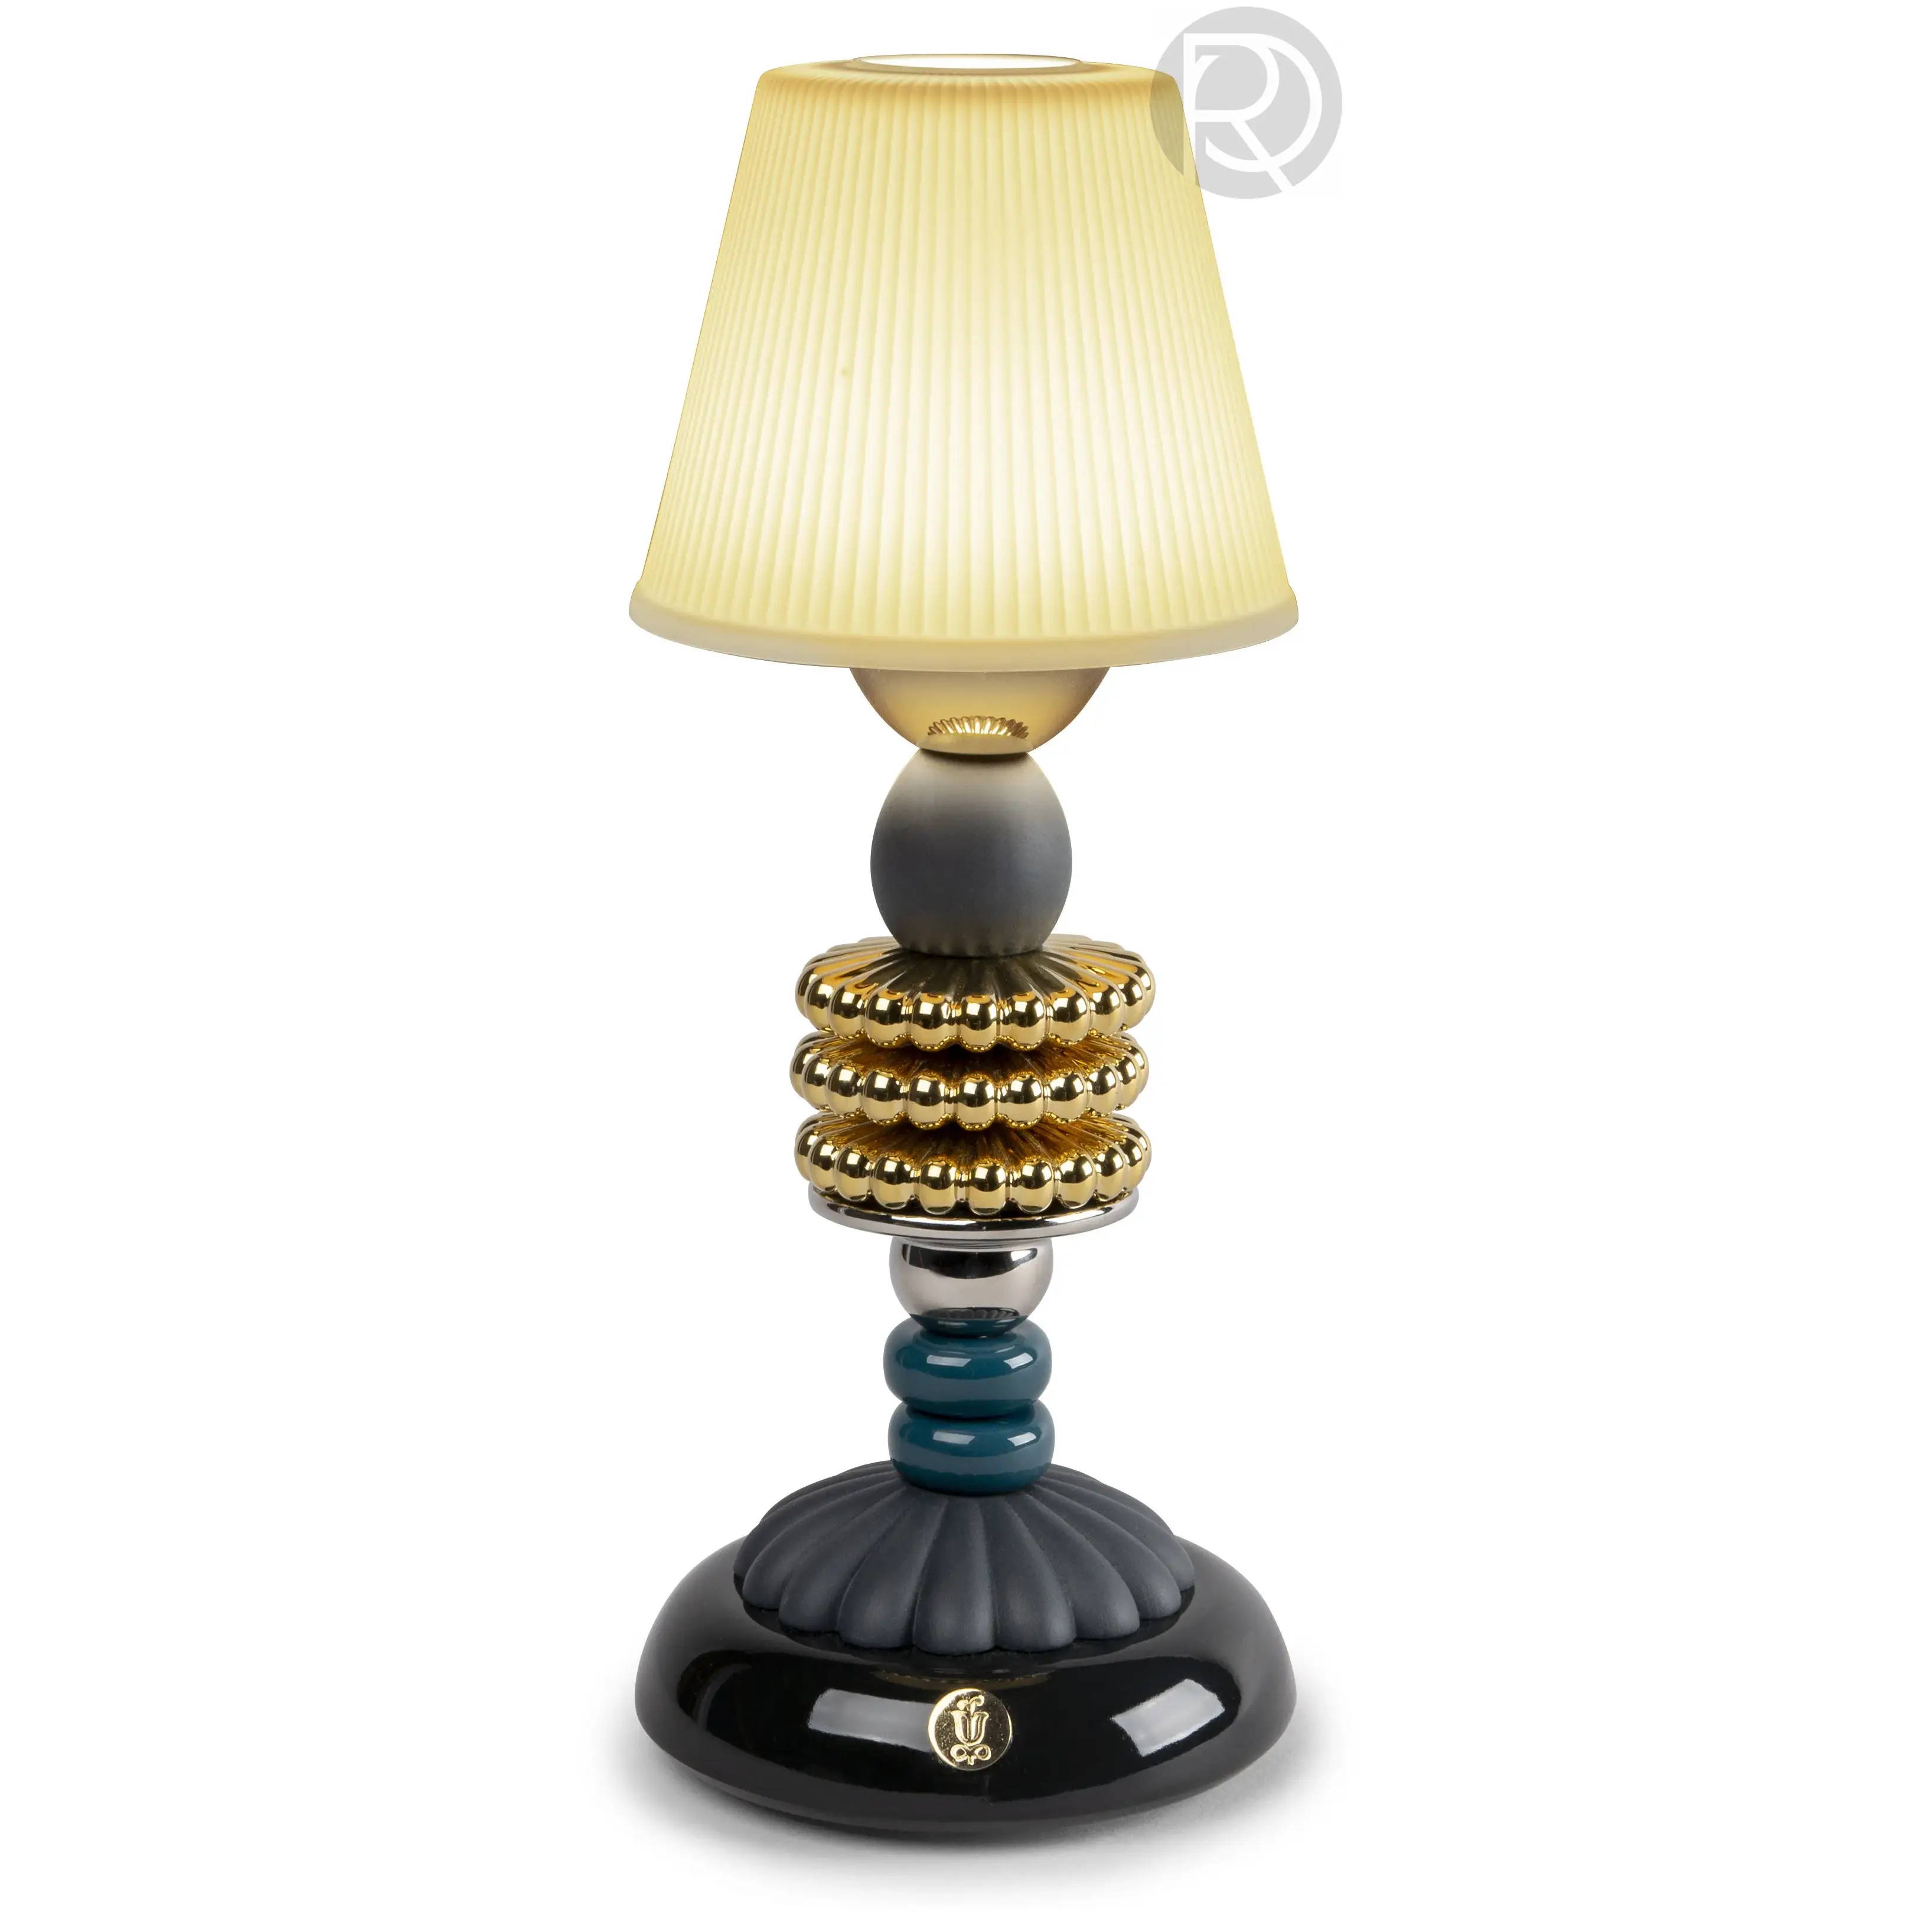 Table lamp FIREFLY by Lladro